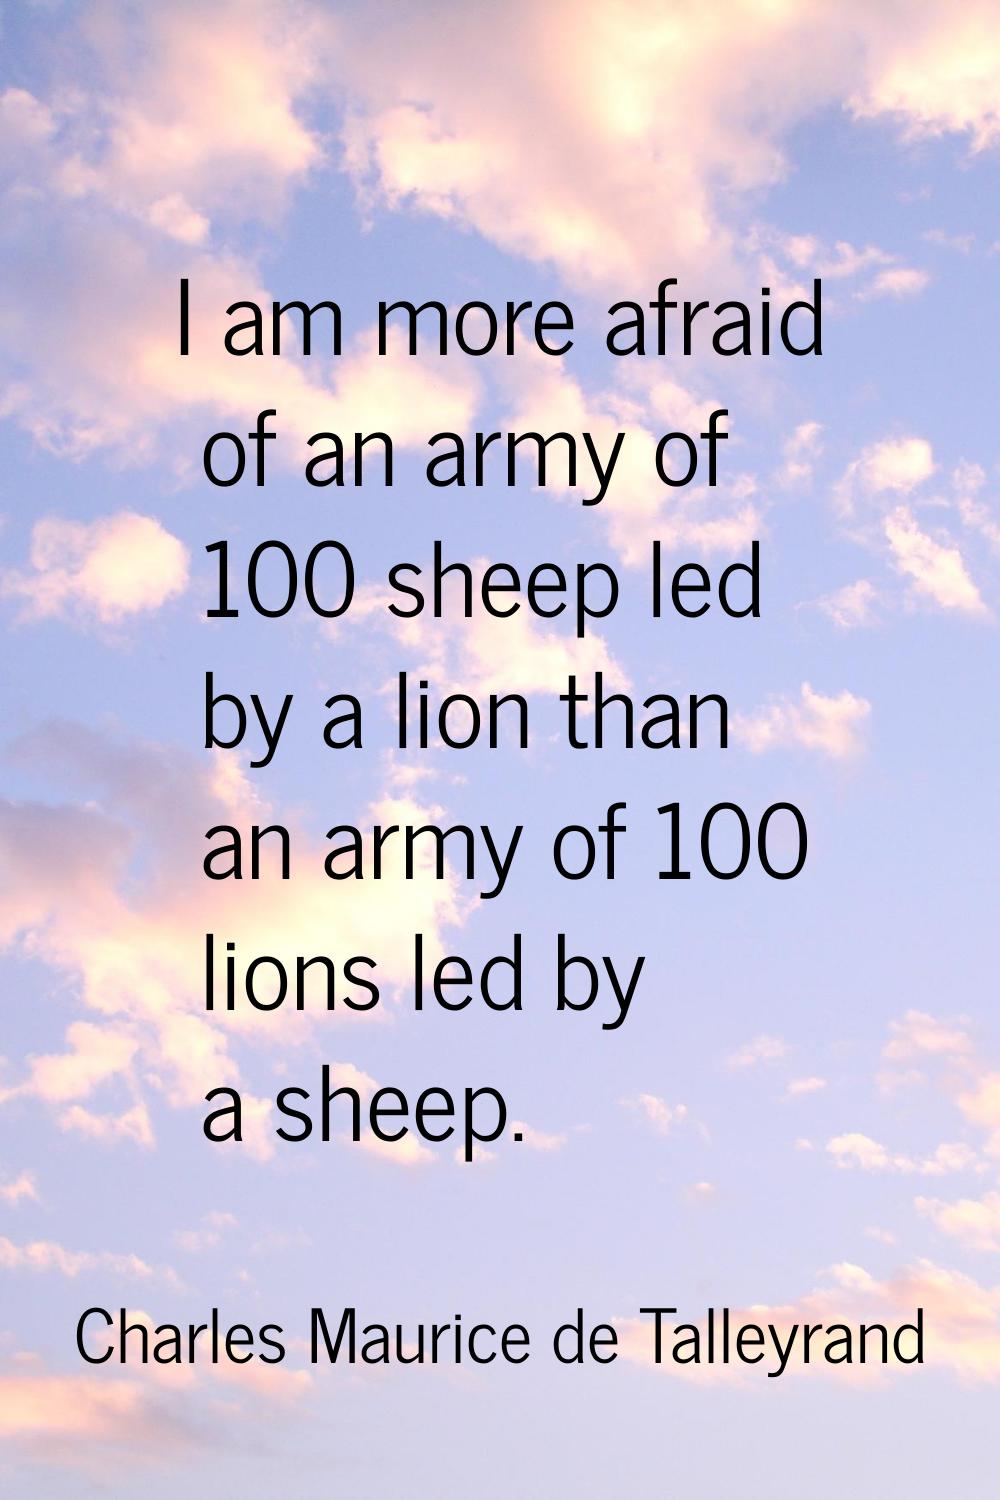 I am more afraid of an army of 100 sheep led by a lion than an army of 100 lions led by a sheep.